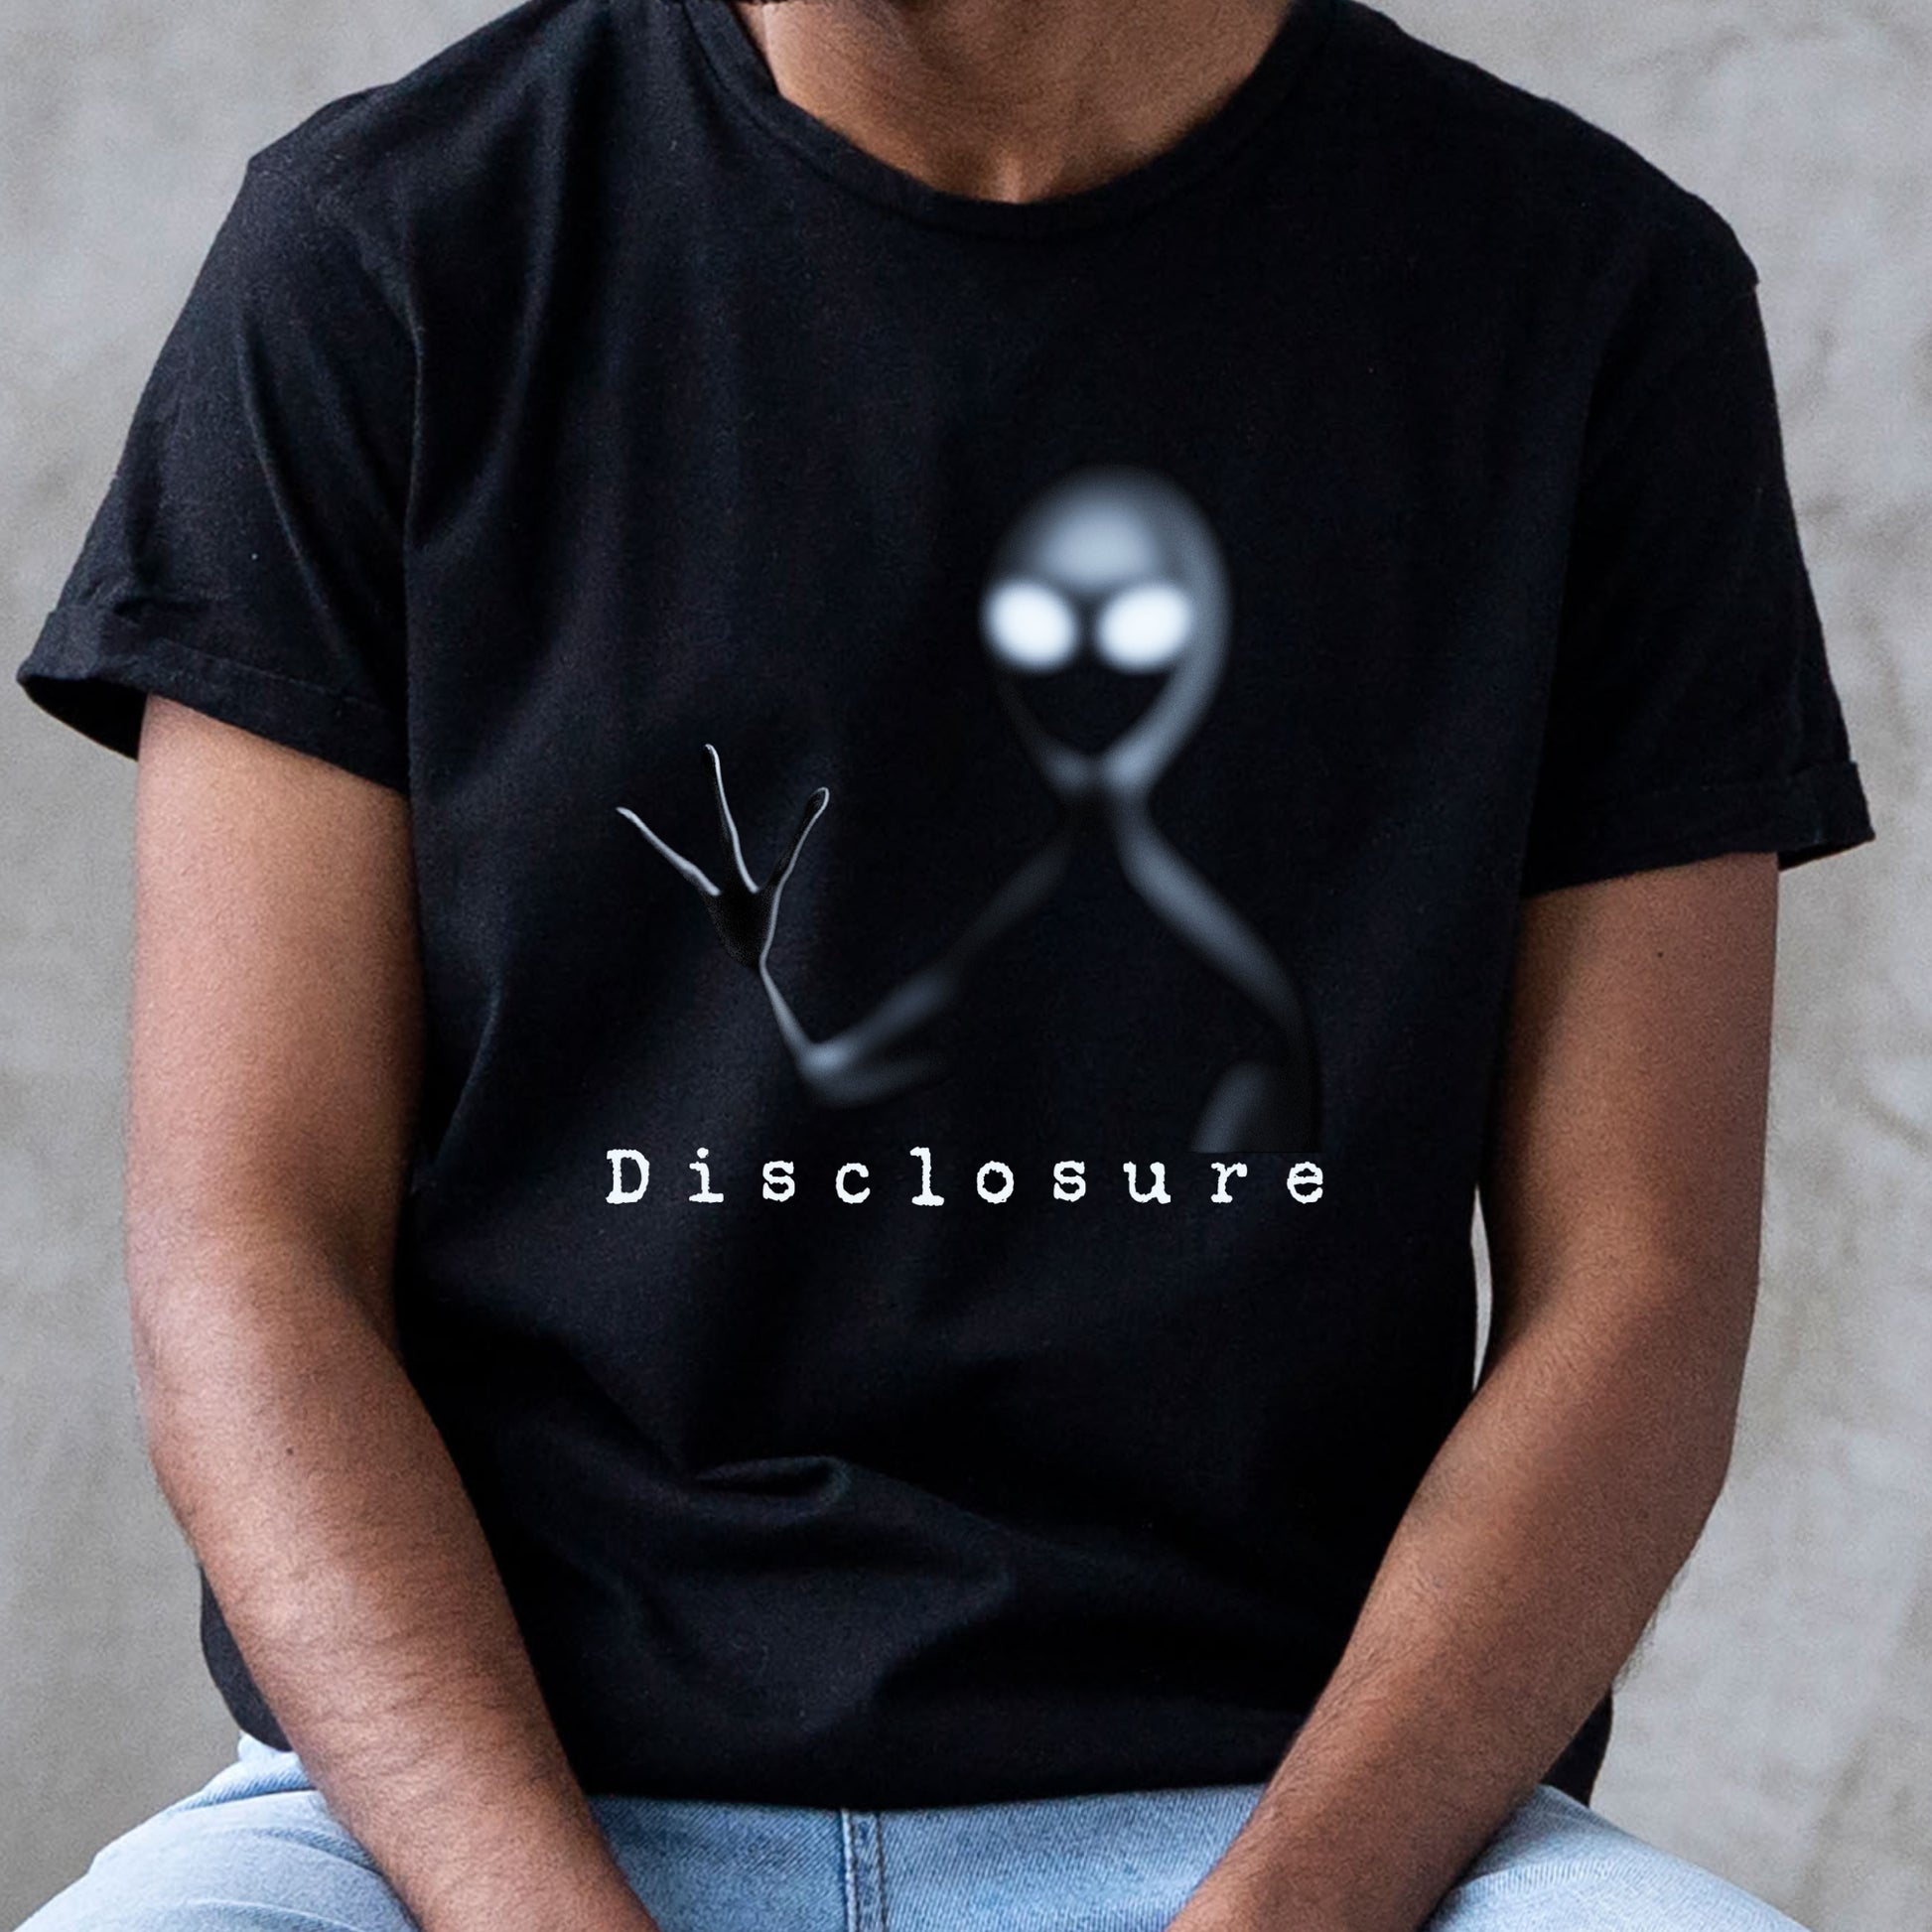 classic black t-shirt depicting a white alien shadow figure reaching out with the word Disclosure underneath.